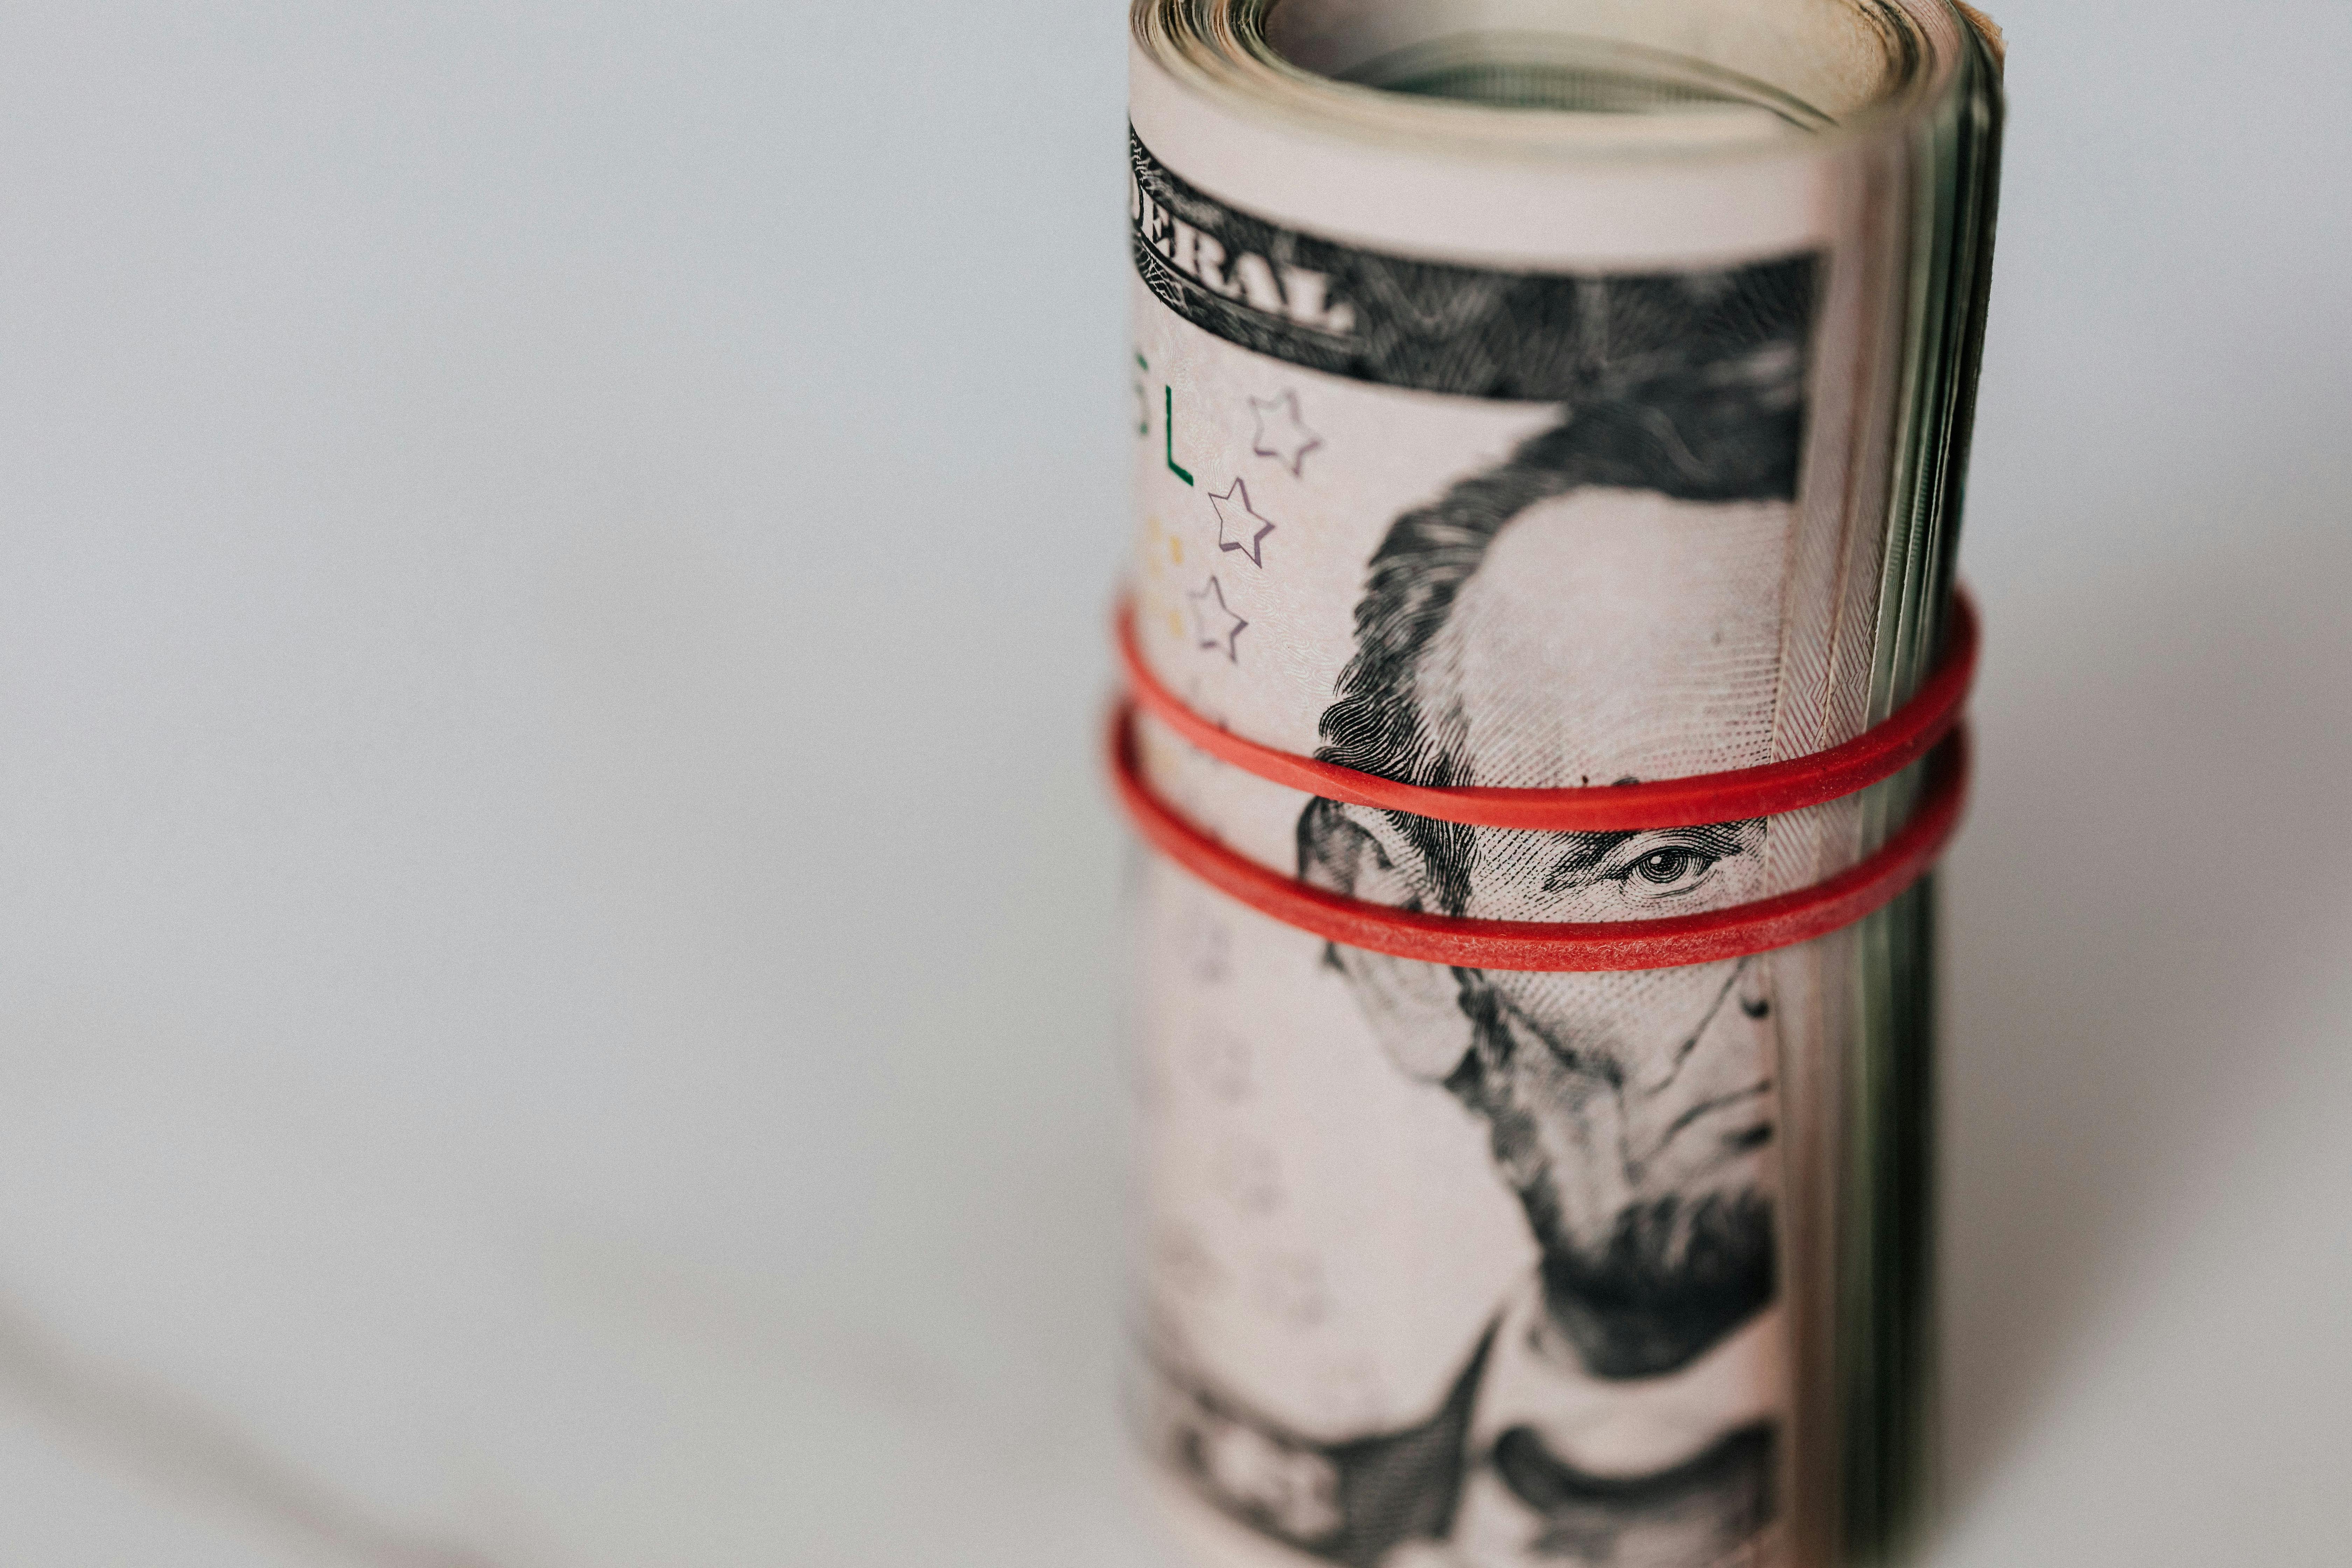 A roll of money | Source: Pexels